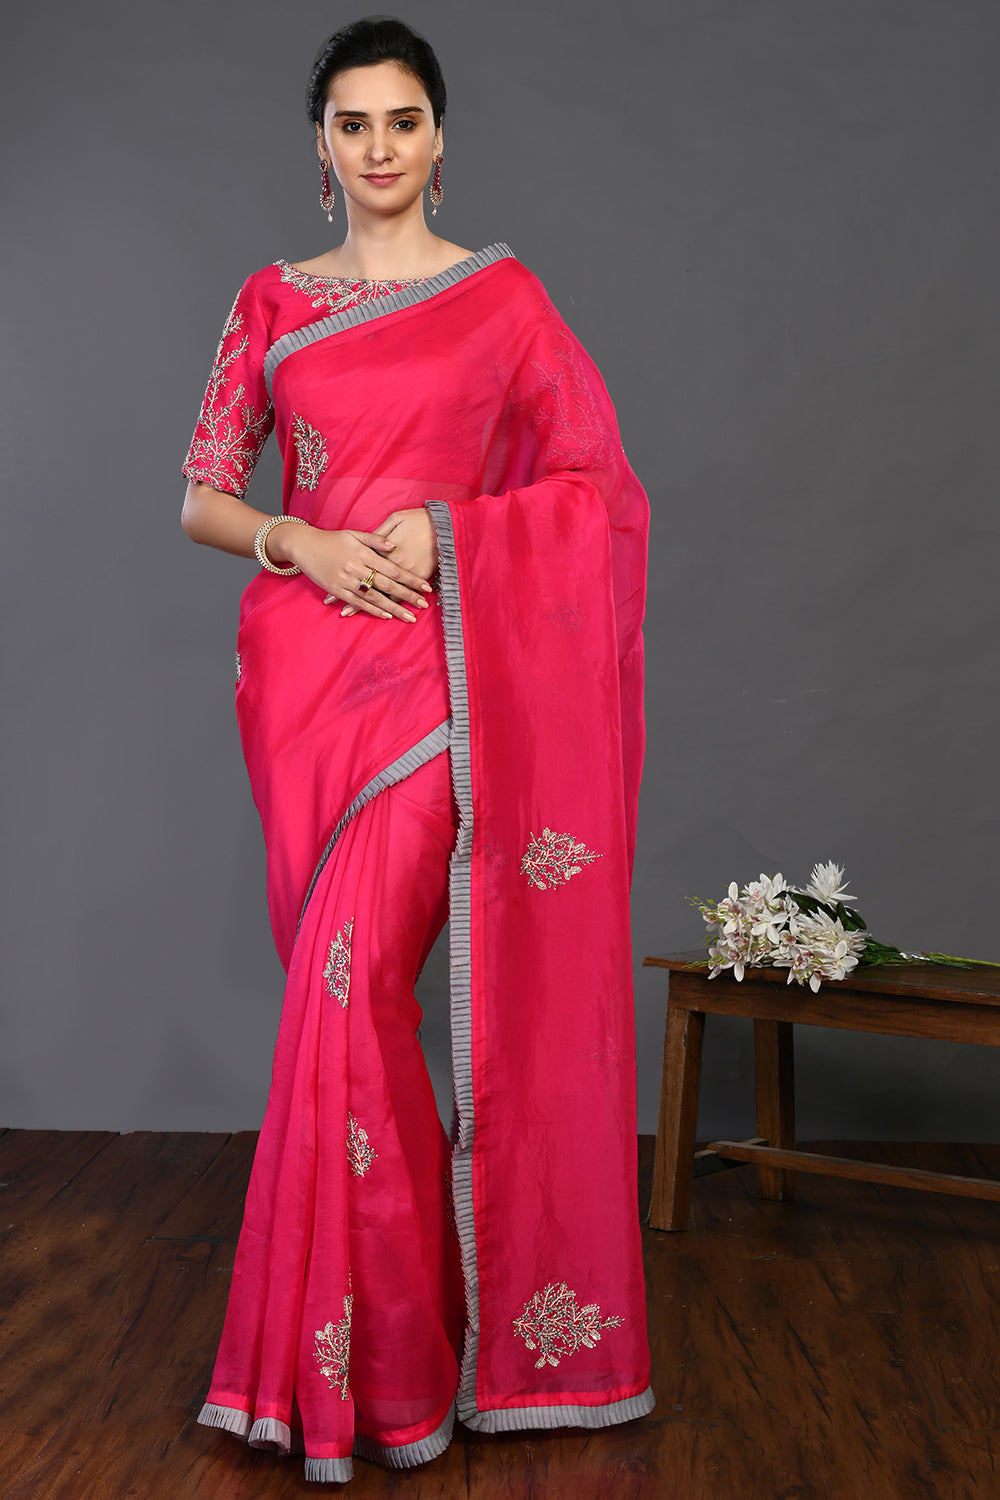 Buy rani pink bulian zari and sequin work organza sari online in USA. Make a fashion statement on festive occasions and weddings with designer sarees, designer suits, Indian dresses, Anarkali suits, palazzo suits, designer gowns, sharara suits, embroidered sarees from Pure Elegance Indian fashion store in USA.-full view